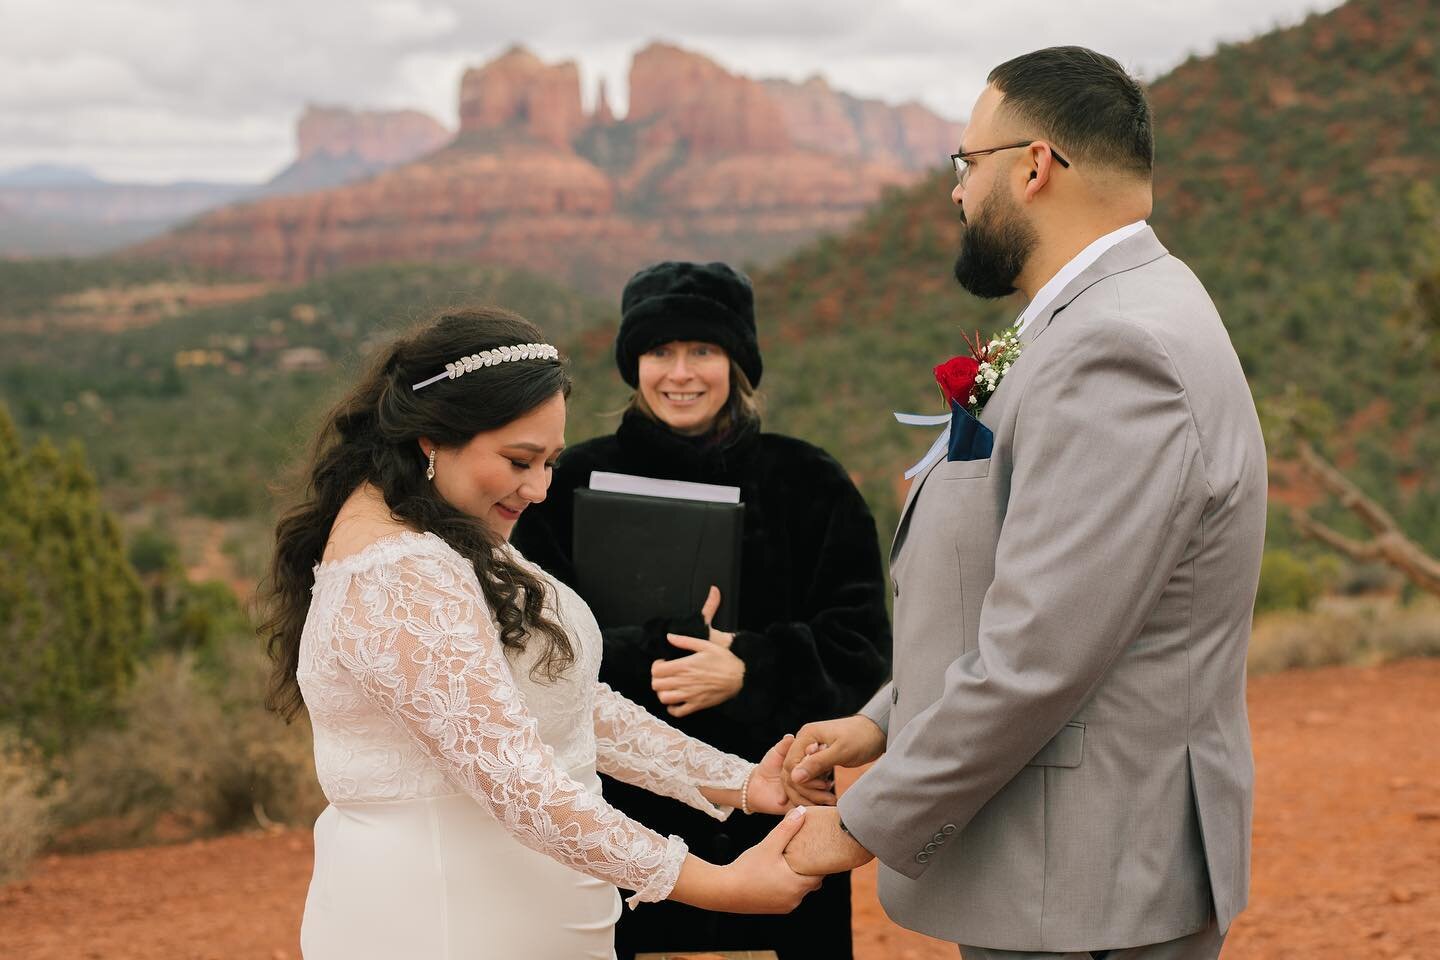 As the temperature tops 100&deg; again today, it is so refreshing to look back on another winter wedding. And this was a cold one! Although of course you would not know it looking at the couple.😁 #sedonawedding #sedonaelopement #getmarriedinsedona #